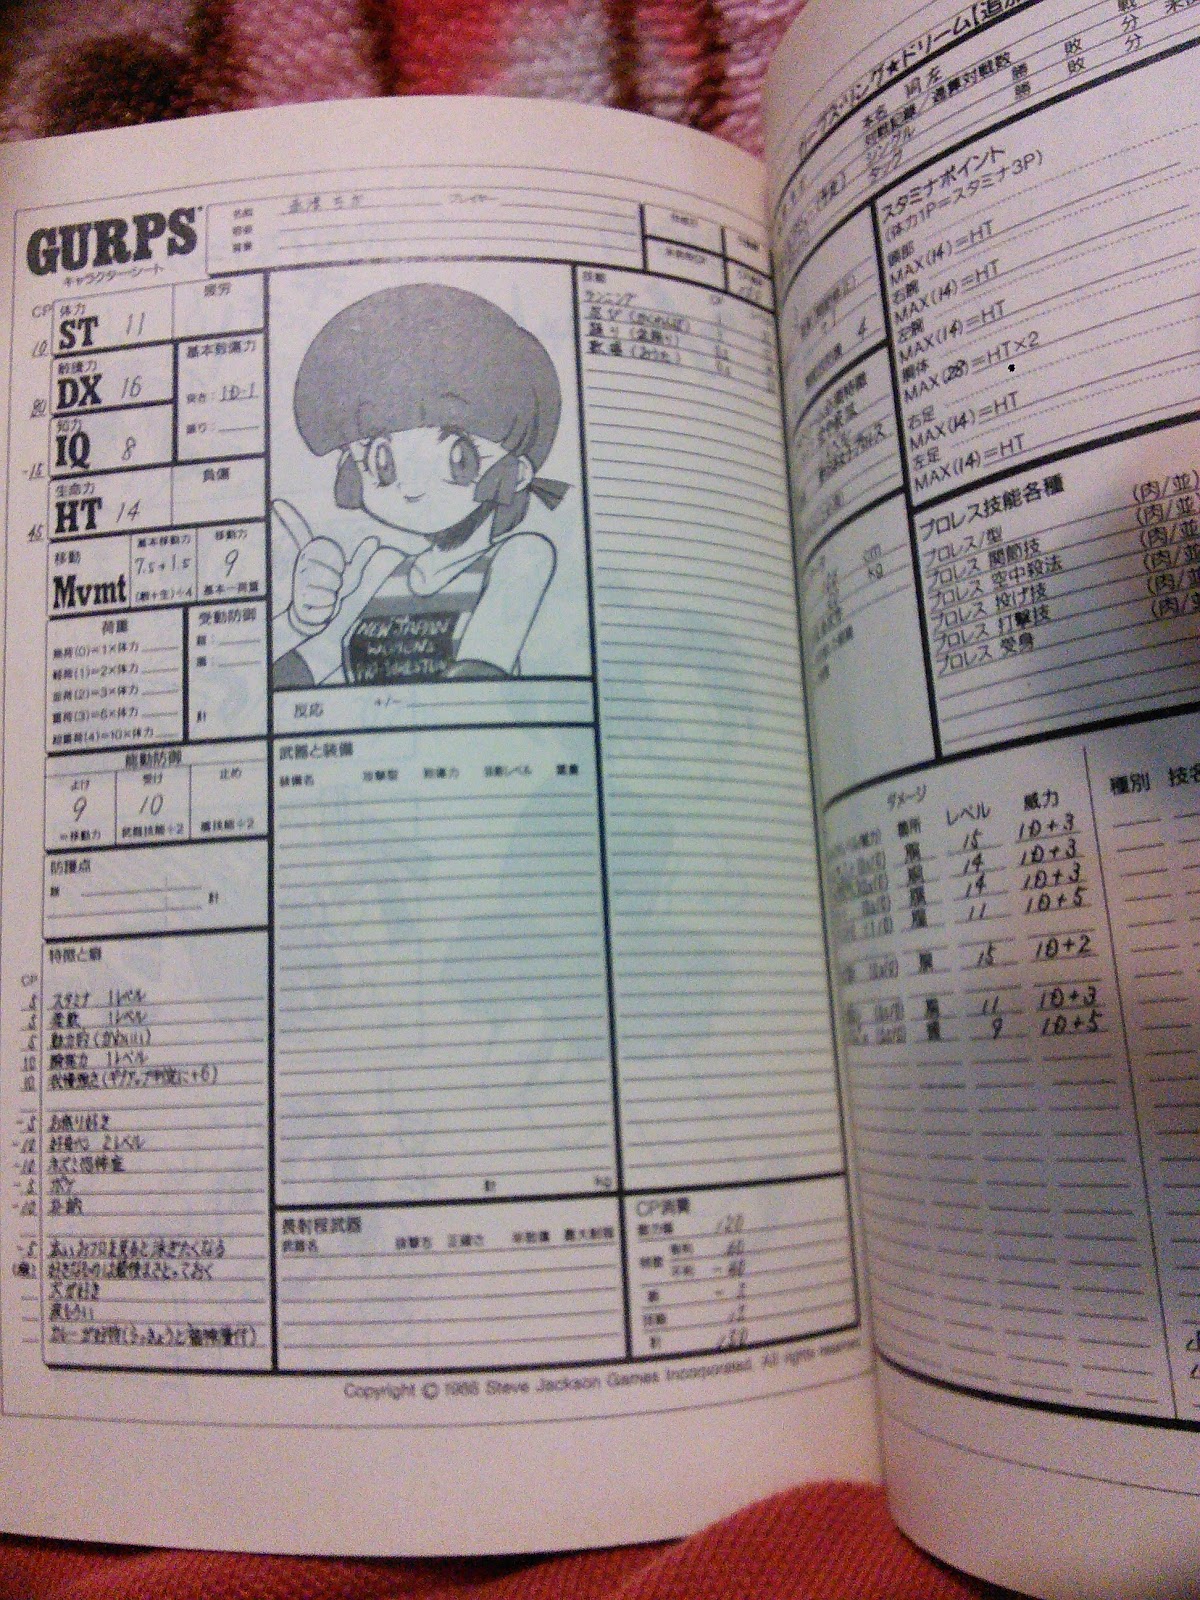 gurps 3rd edition character sheet for fillable pdf